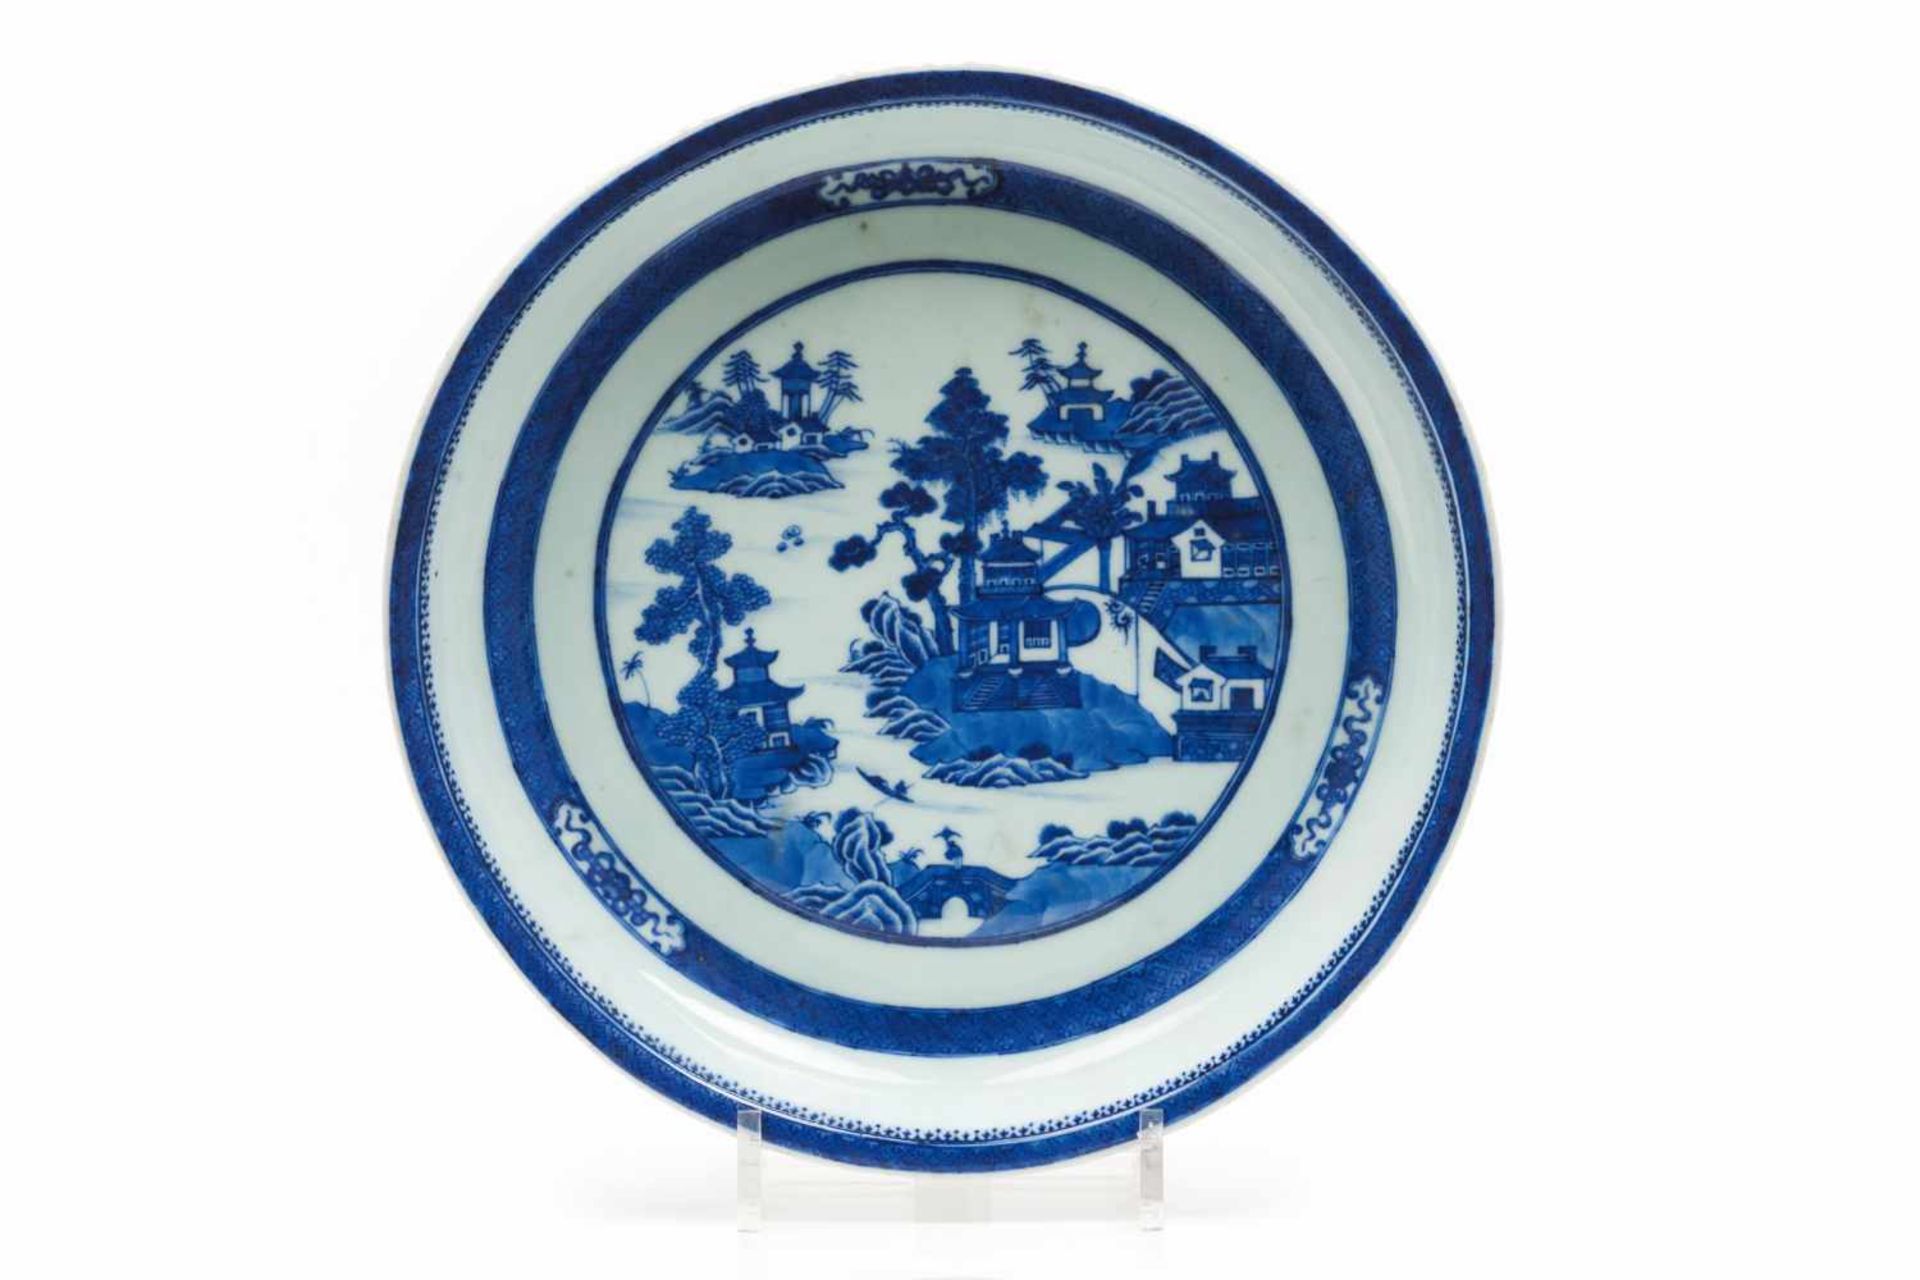 A large plateChinese porcelainBlue underglaze decoration of river view with pagodasDaog